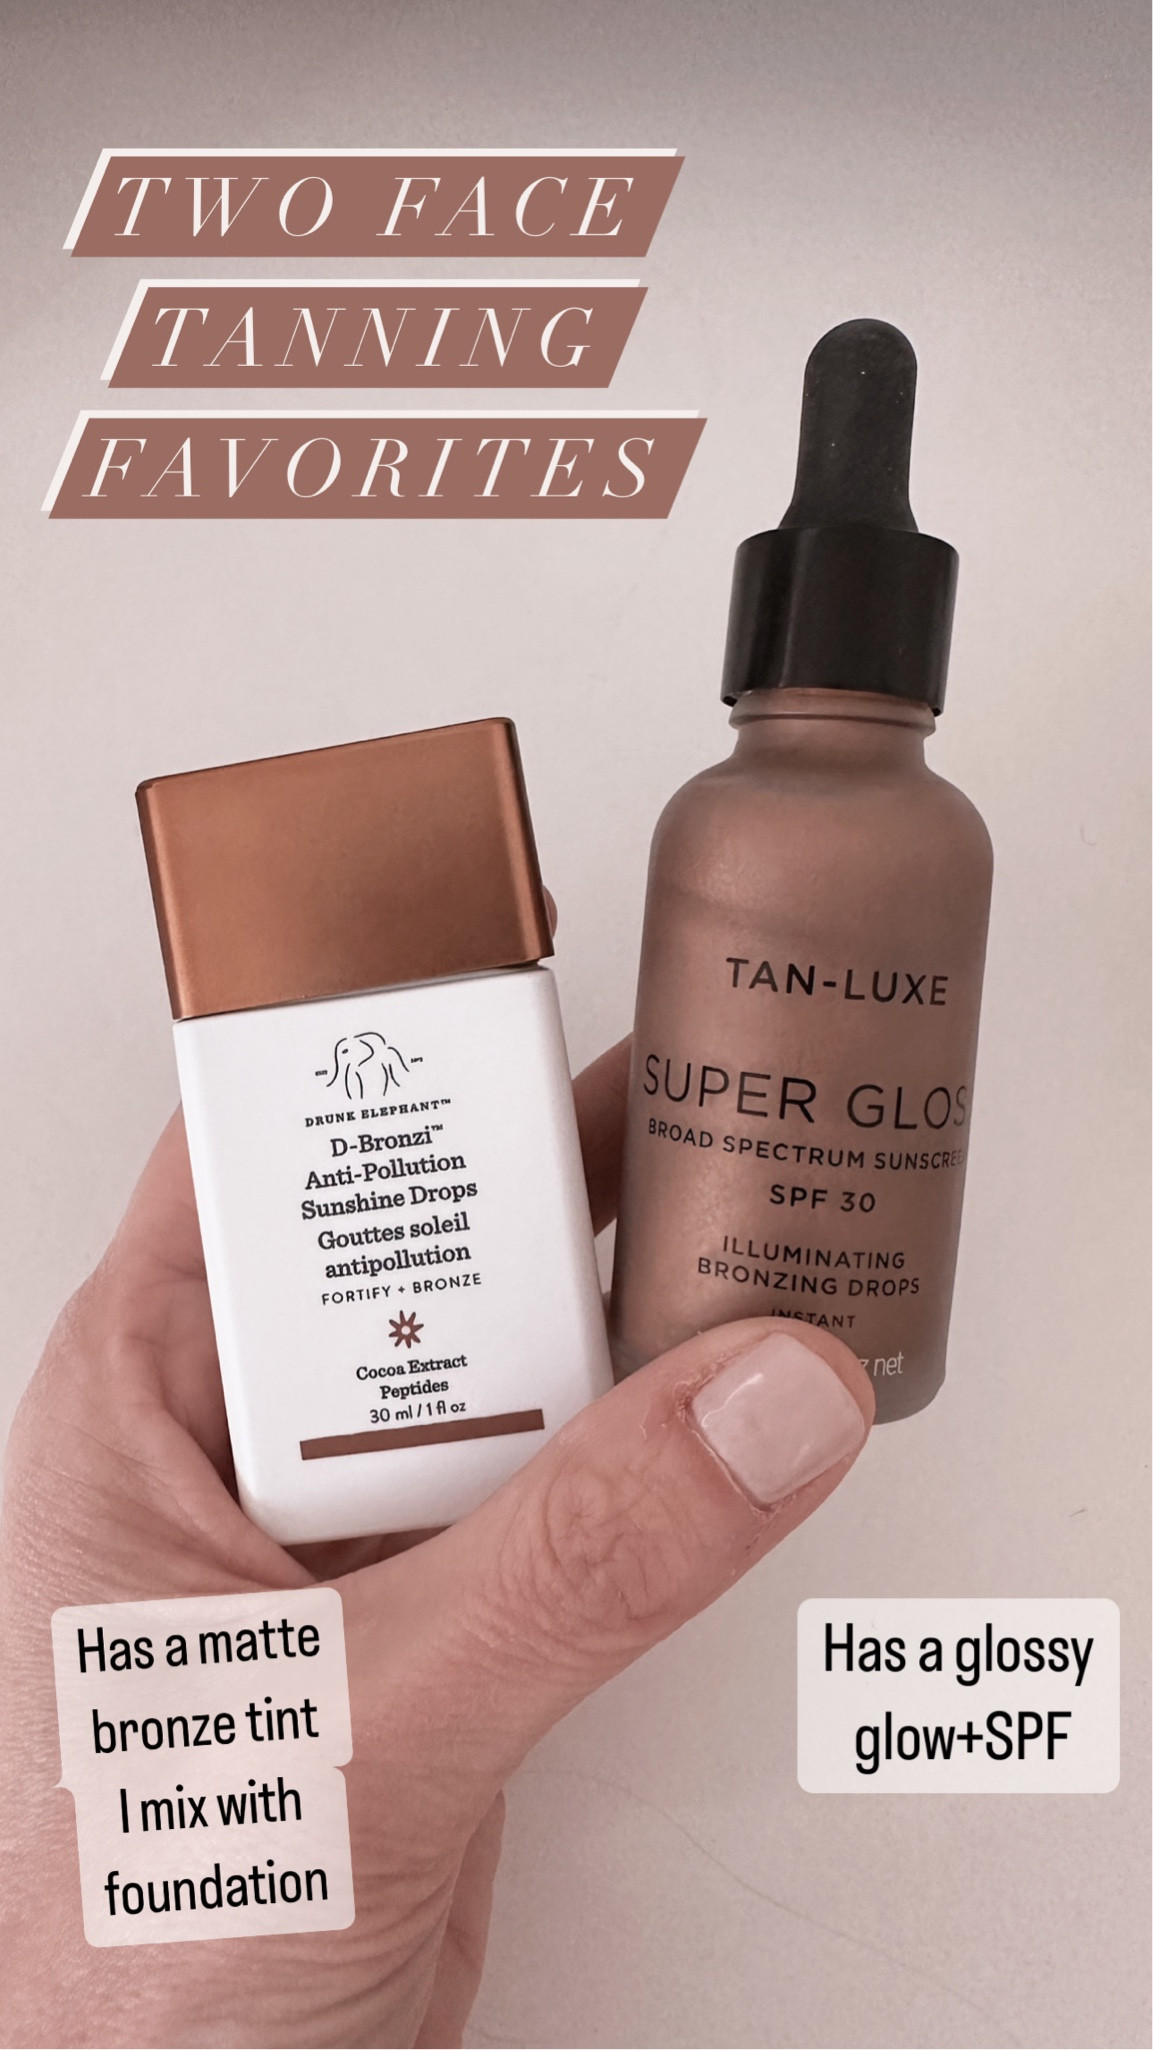 TAN-LUXE Super Gloss Instant Bronzing Face Drops with SPF 30